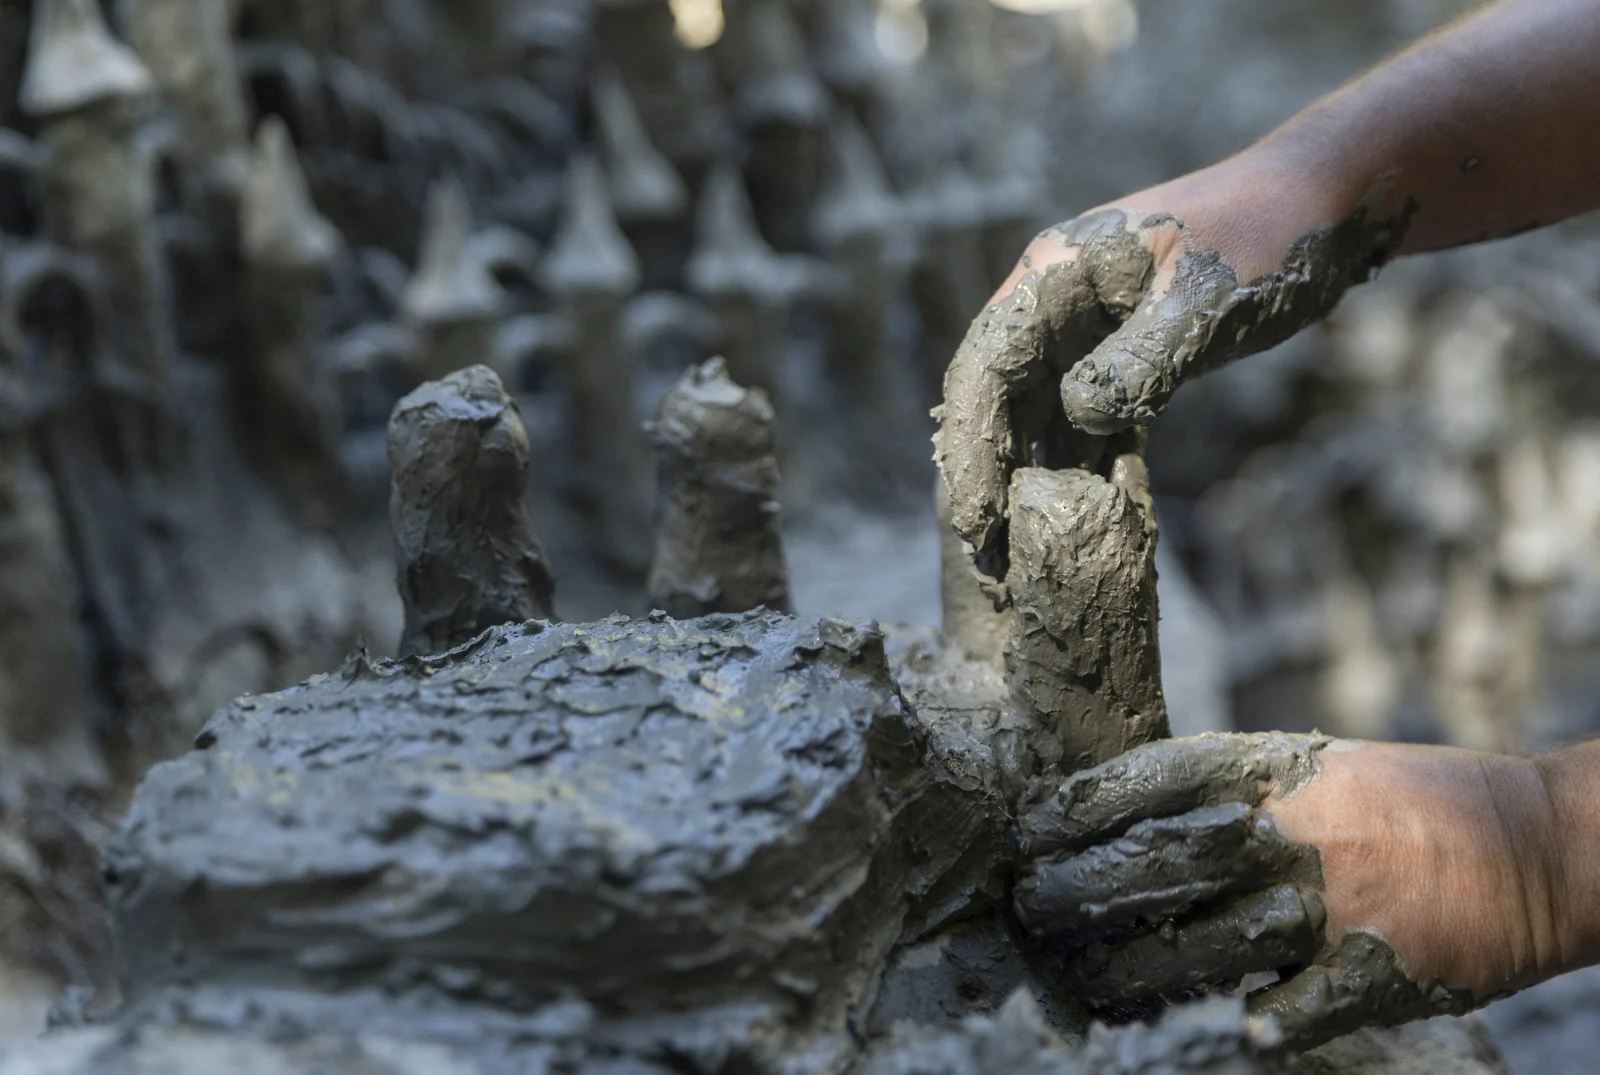 Land art artist Francois Monthoux works on his "Monthoux castle" made out of clay retrieved from the dried bed of Le Toleure river due to ongoing drought, in Saubraz, Switzerland, August 12, 2022. REUTERS/Denis Balibouse